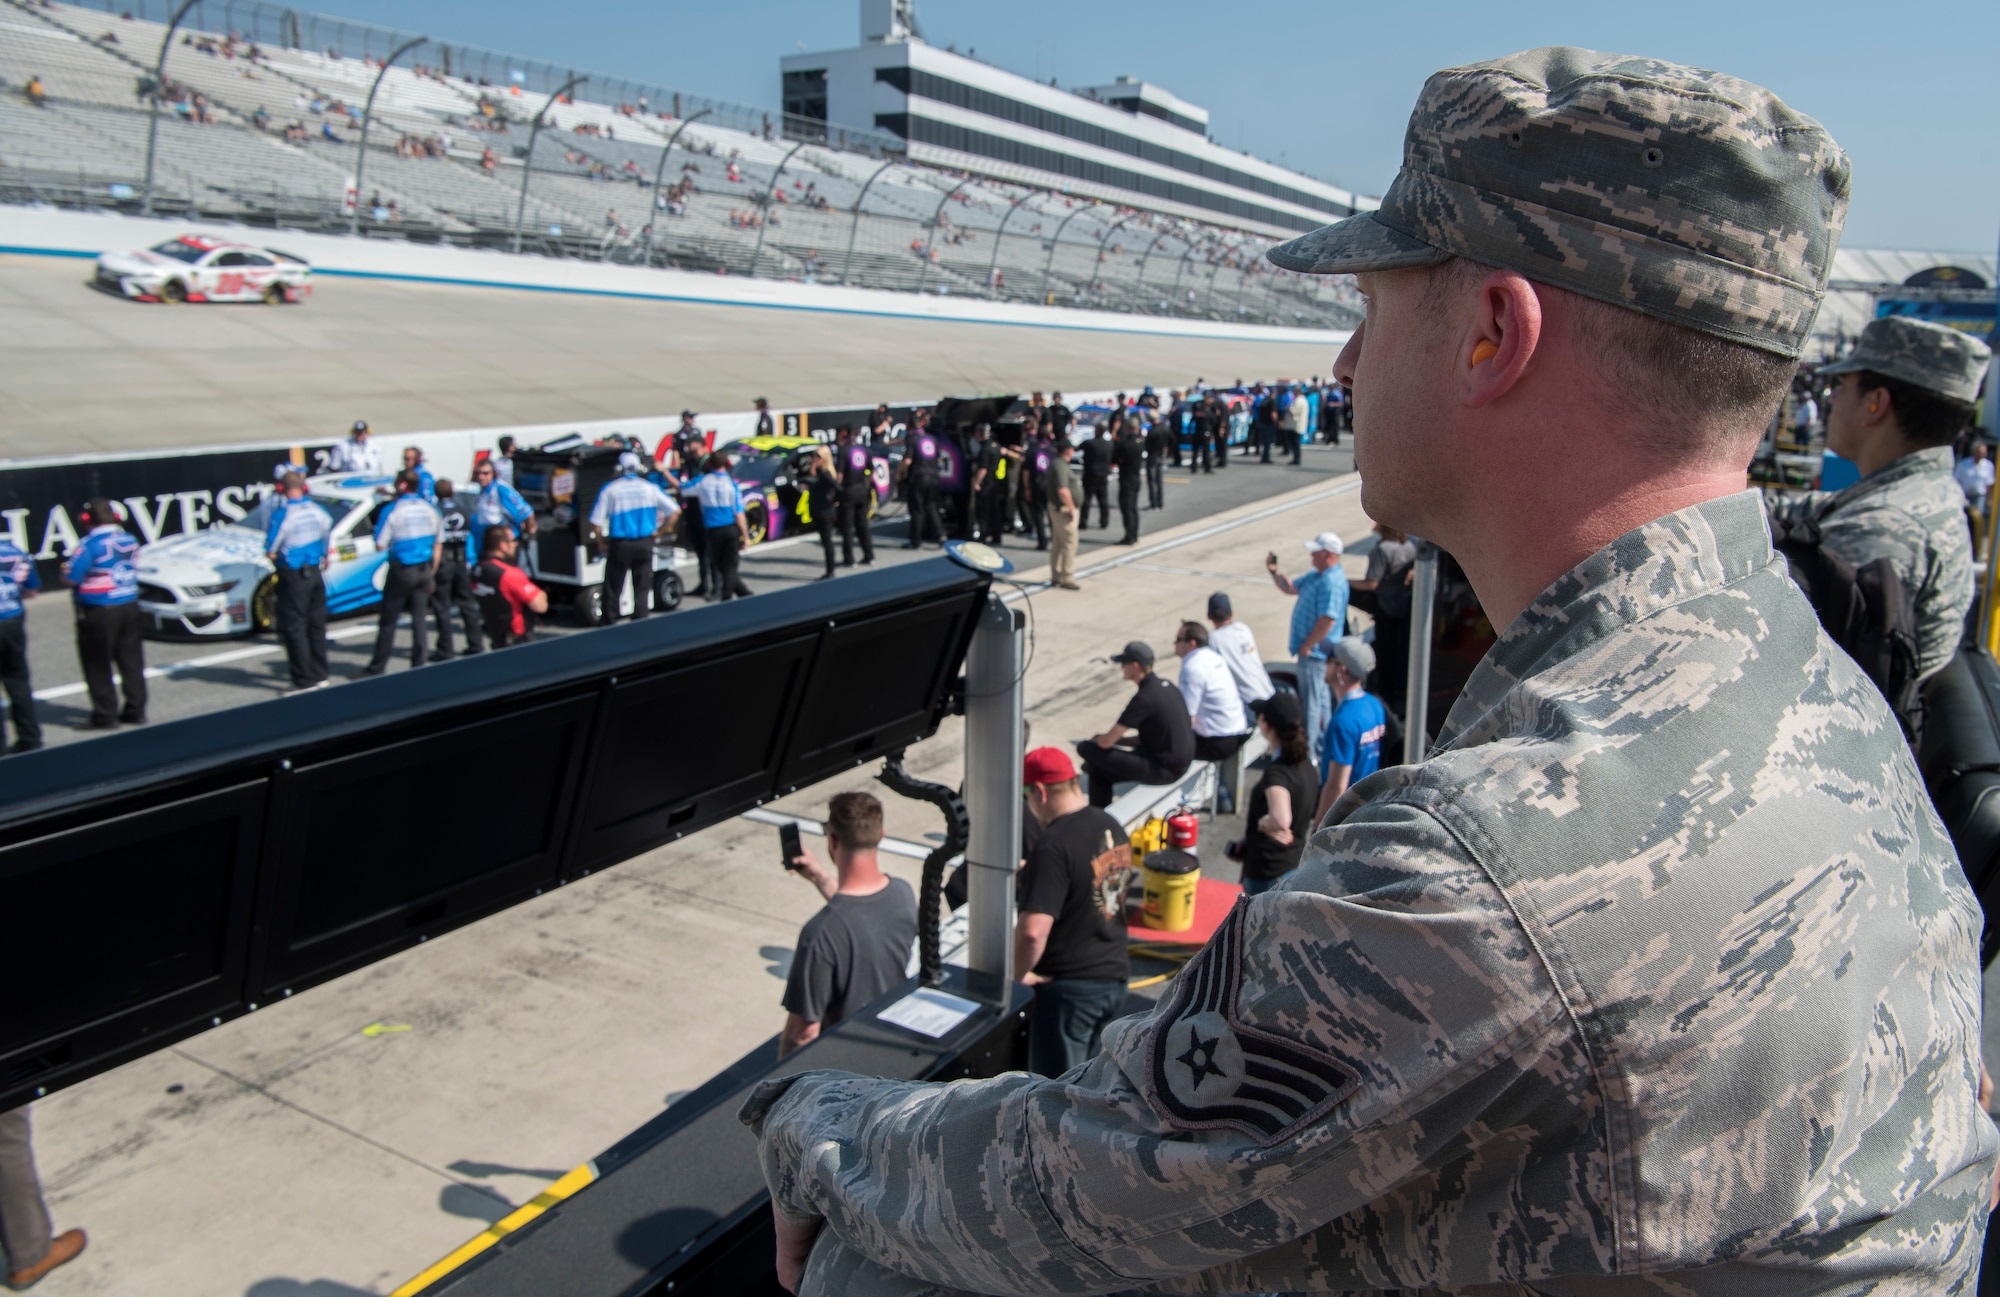 Staff Sgt. Matthew Tatum, 436th Airlift Wing religious affairs Airman, watches the Monster Energy NASCAR Cup Series qualifying race May 3, 2019, at Dover International Speedway, Dover, Del. Tatum,a huge fan of NASCAR, was selected to be one of the approximately 35  honorary pit crew members from Dover Air Force Base. The weekend marked Dover International Speedway’s 50th season and the Monster Mile’s 100th Monster Energy NASCAR Cup Series race. (U.S. Air Force photo by Senior Airman Christopher Quail)